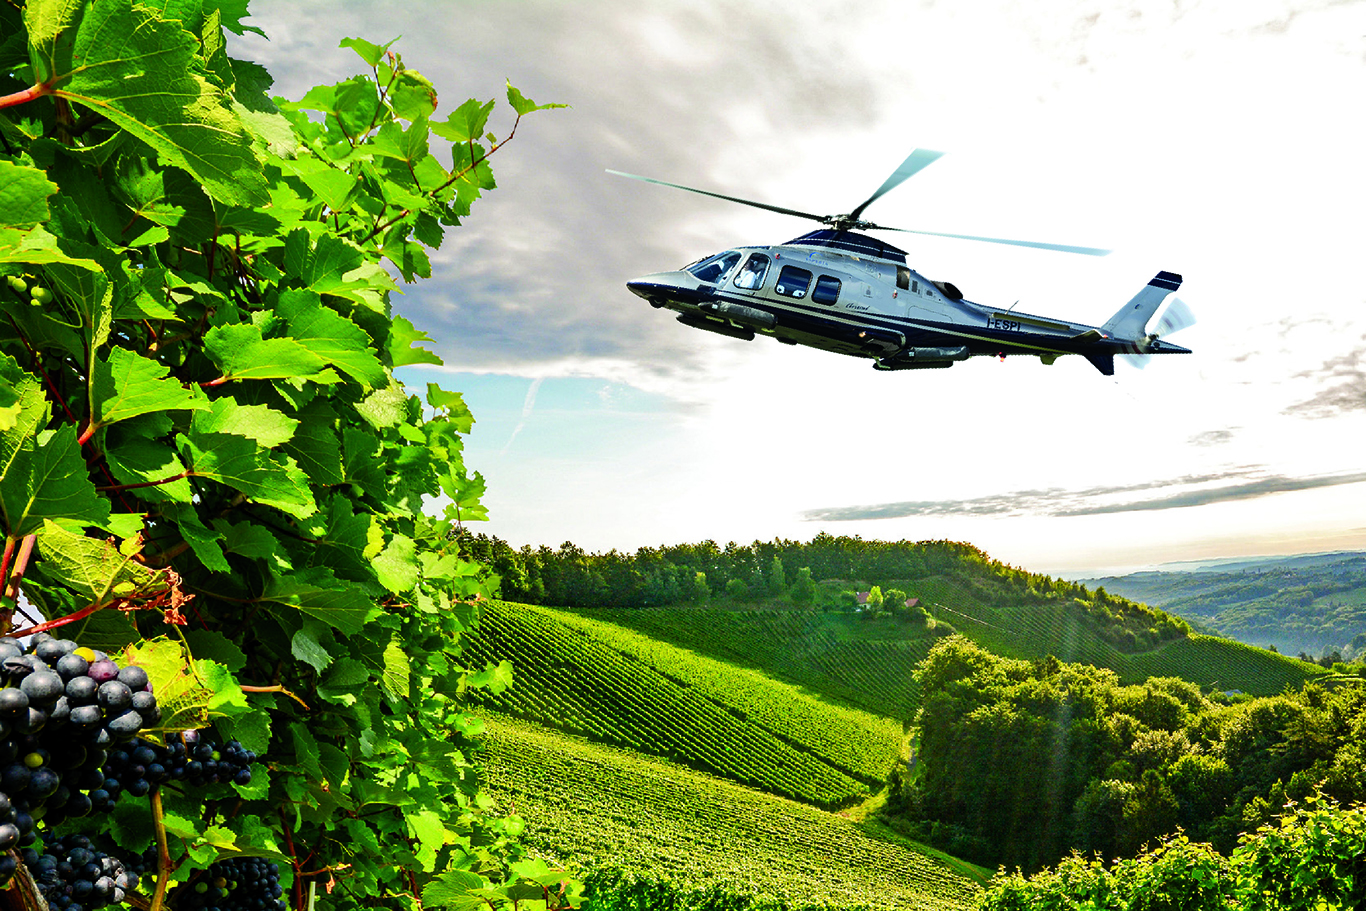 Visit Tenuta Torciano Winery by Helicopter!